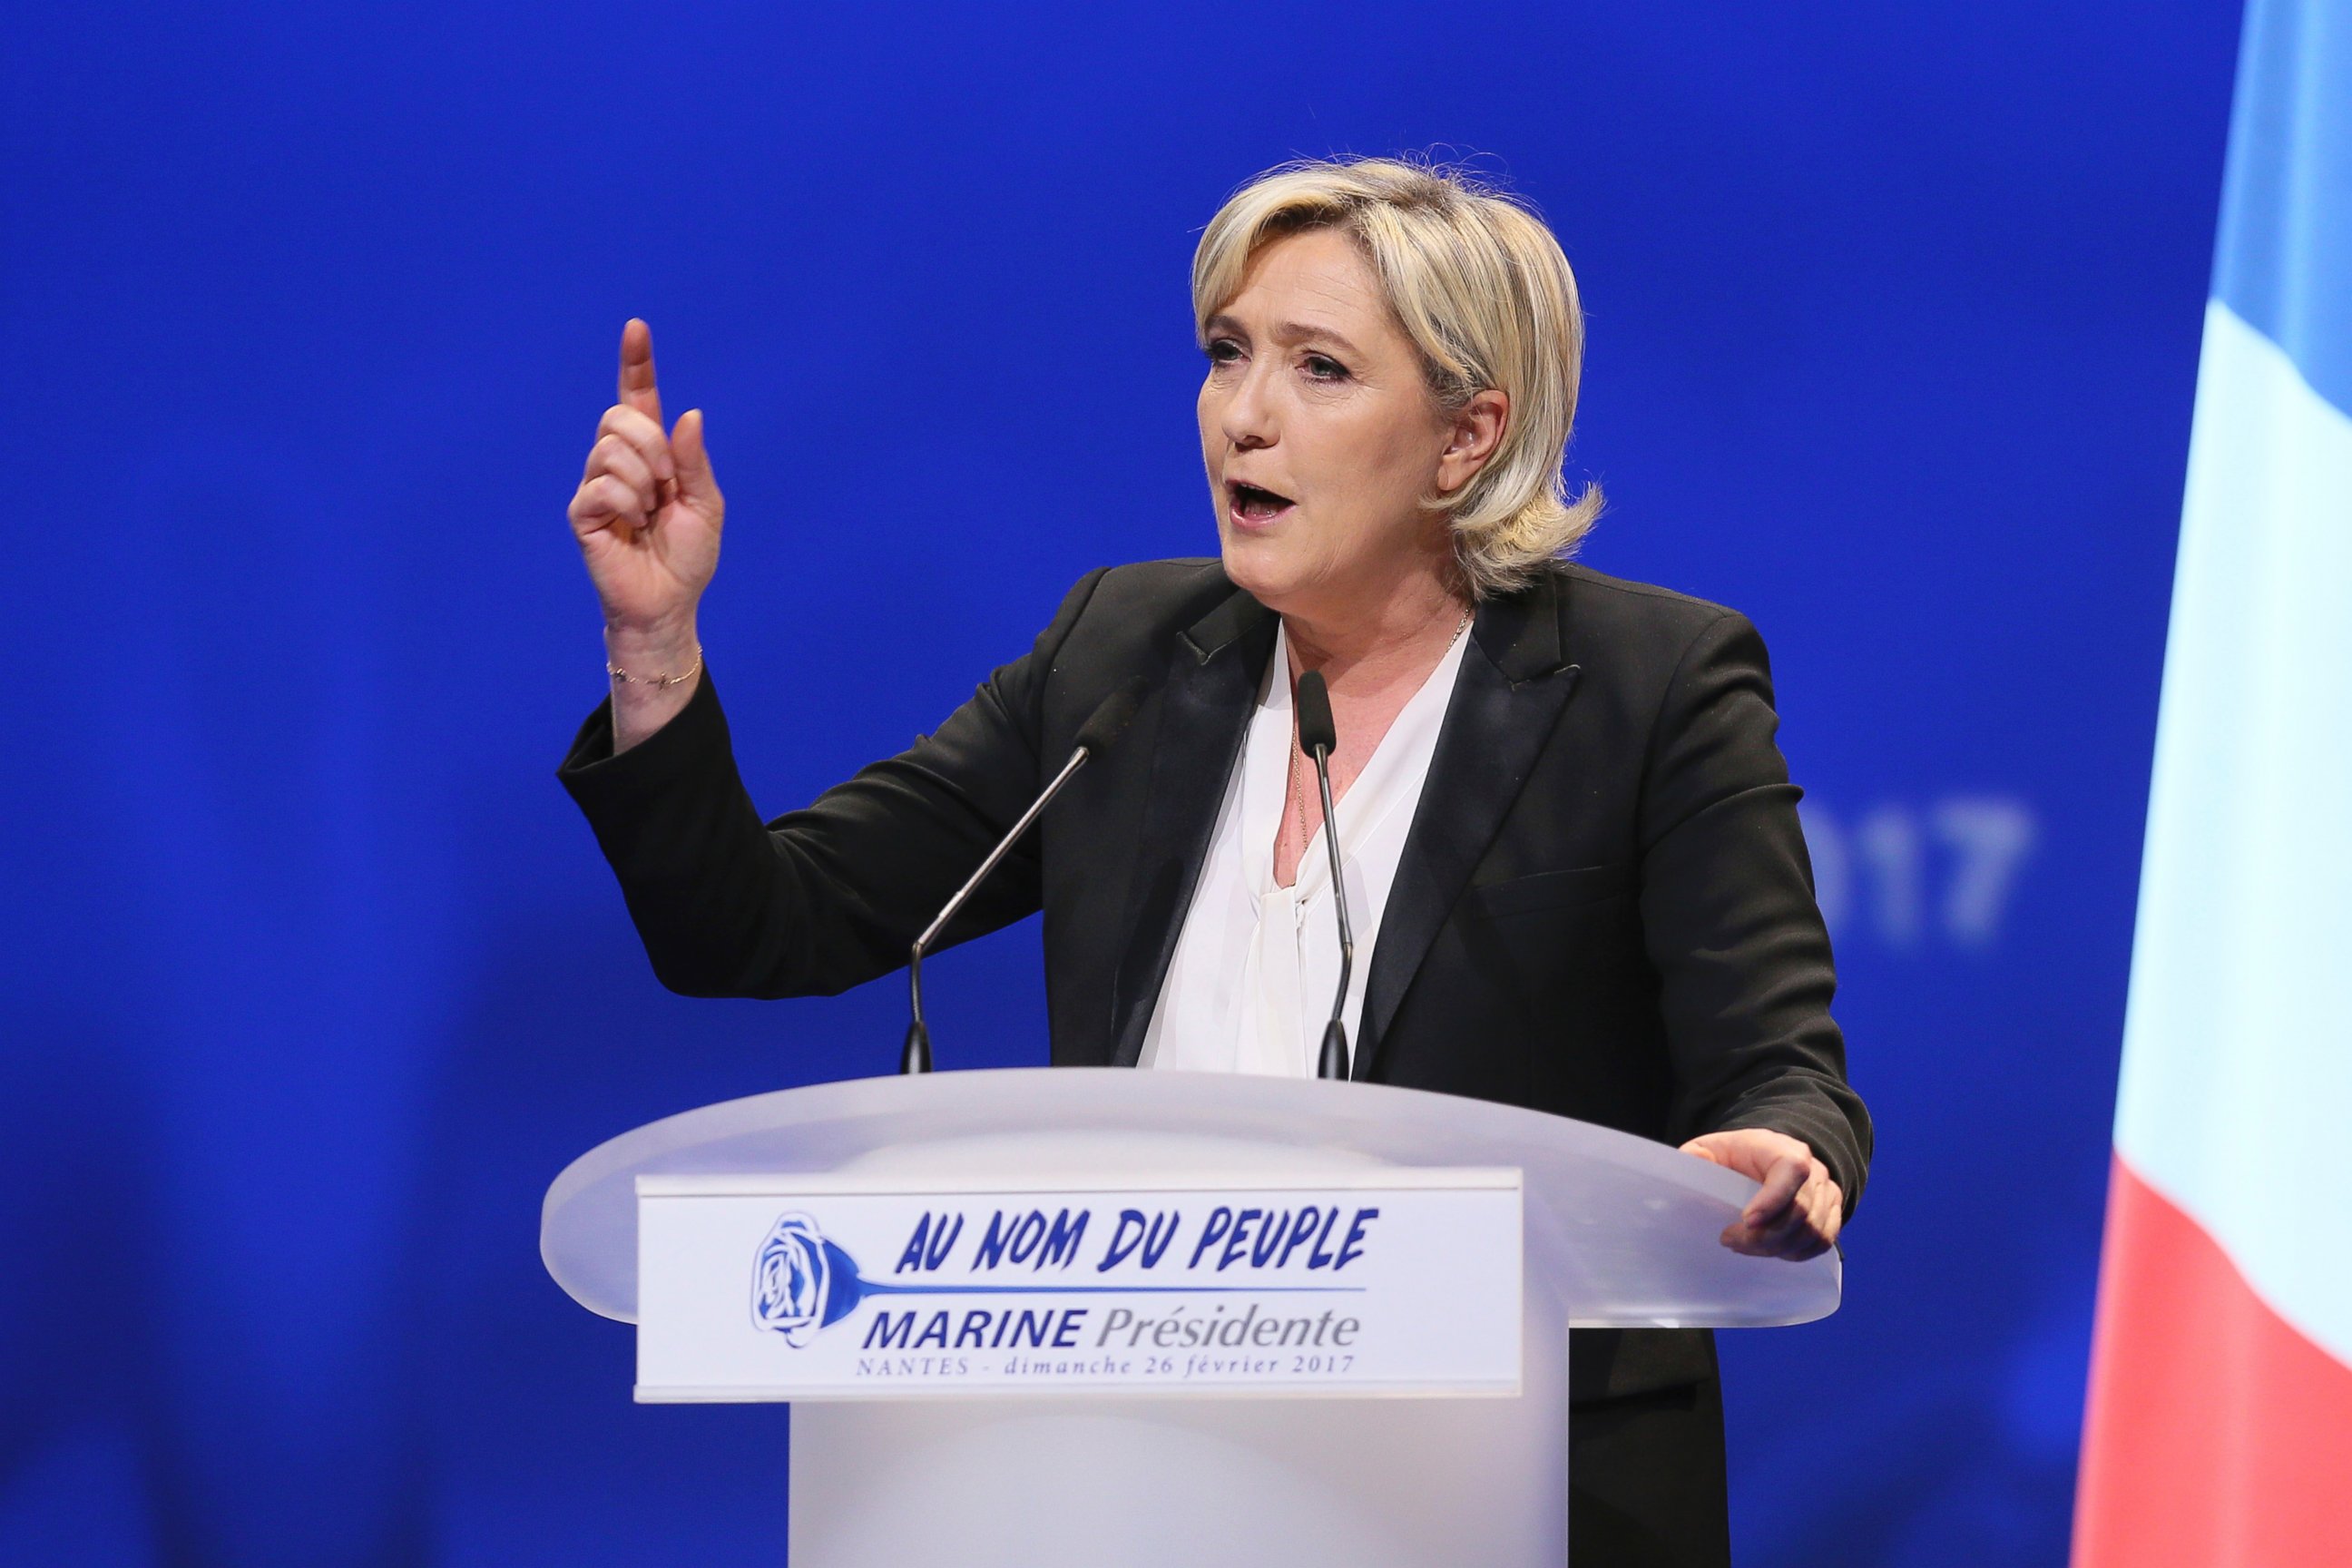 PHOTO: French Far-right leader presidential candidate Marine Le Pen gestures as she speaks during a conference in Nantes, western France, Feb. 26, 2017.